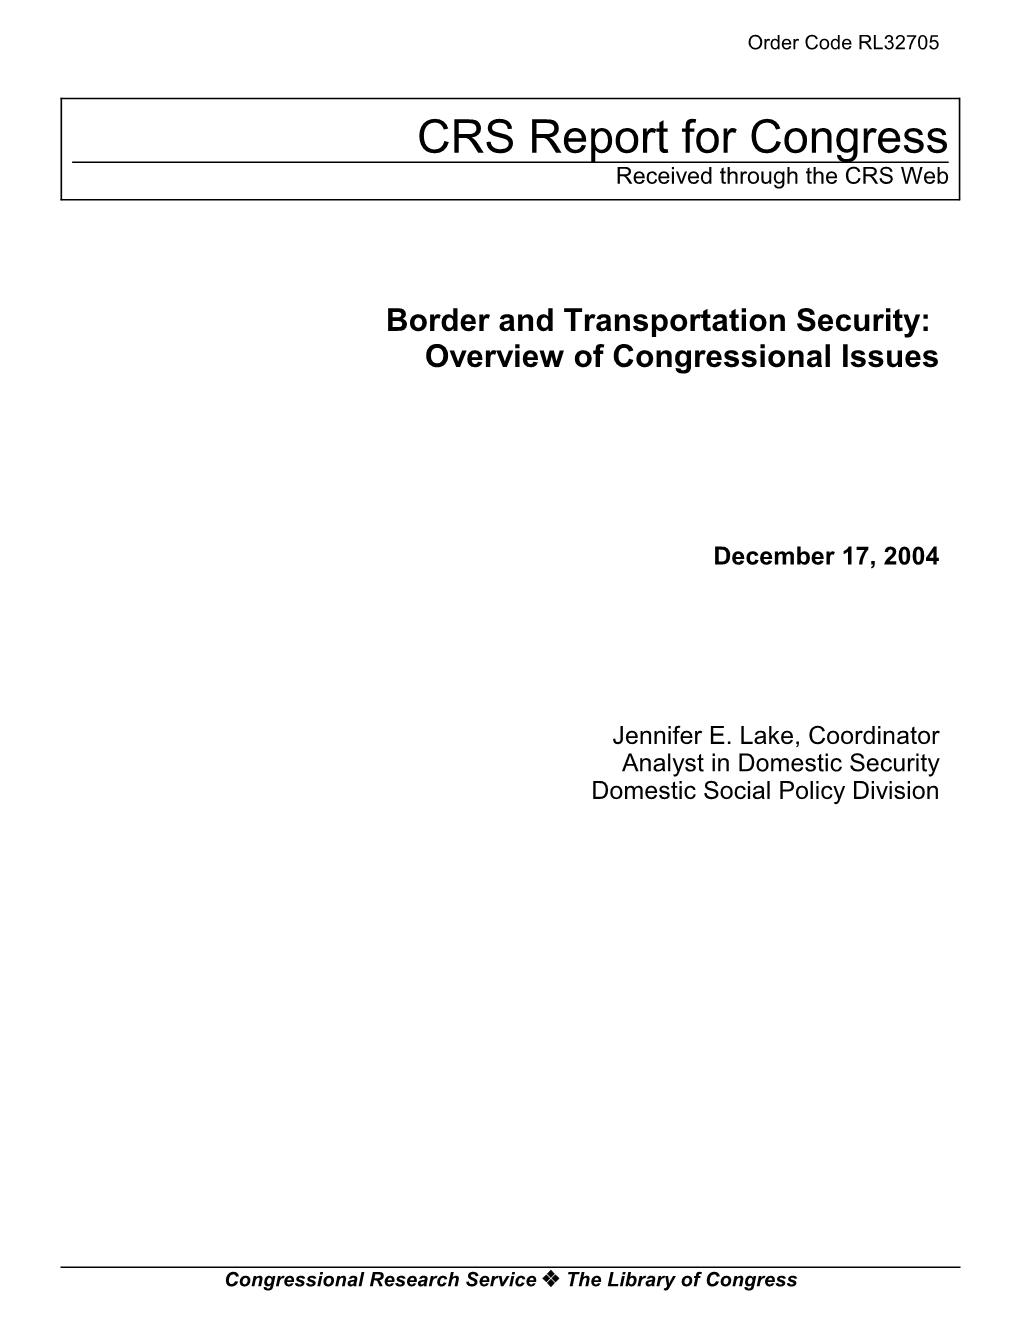 Border and Transportation Security: Overview of Congressional Issues